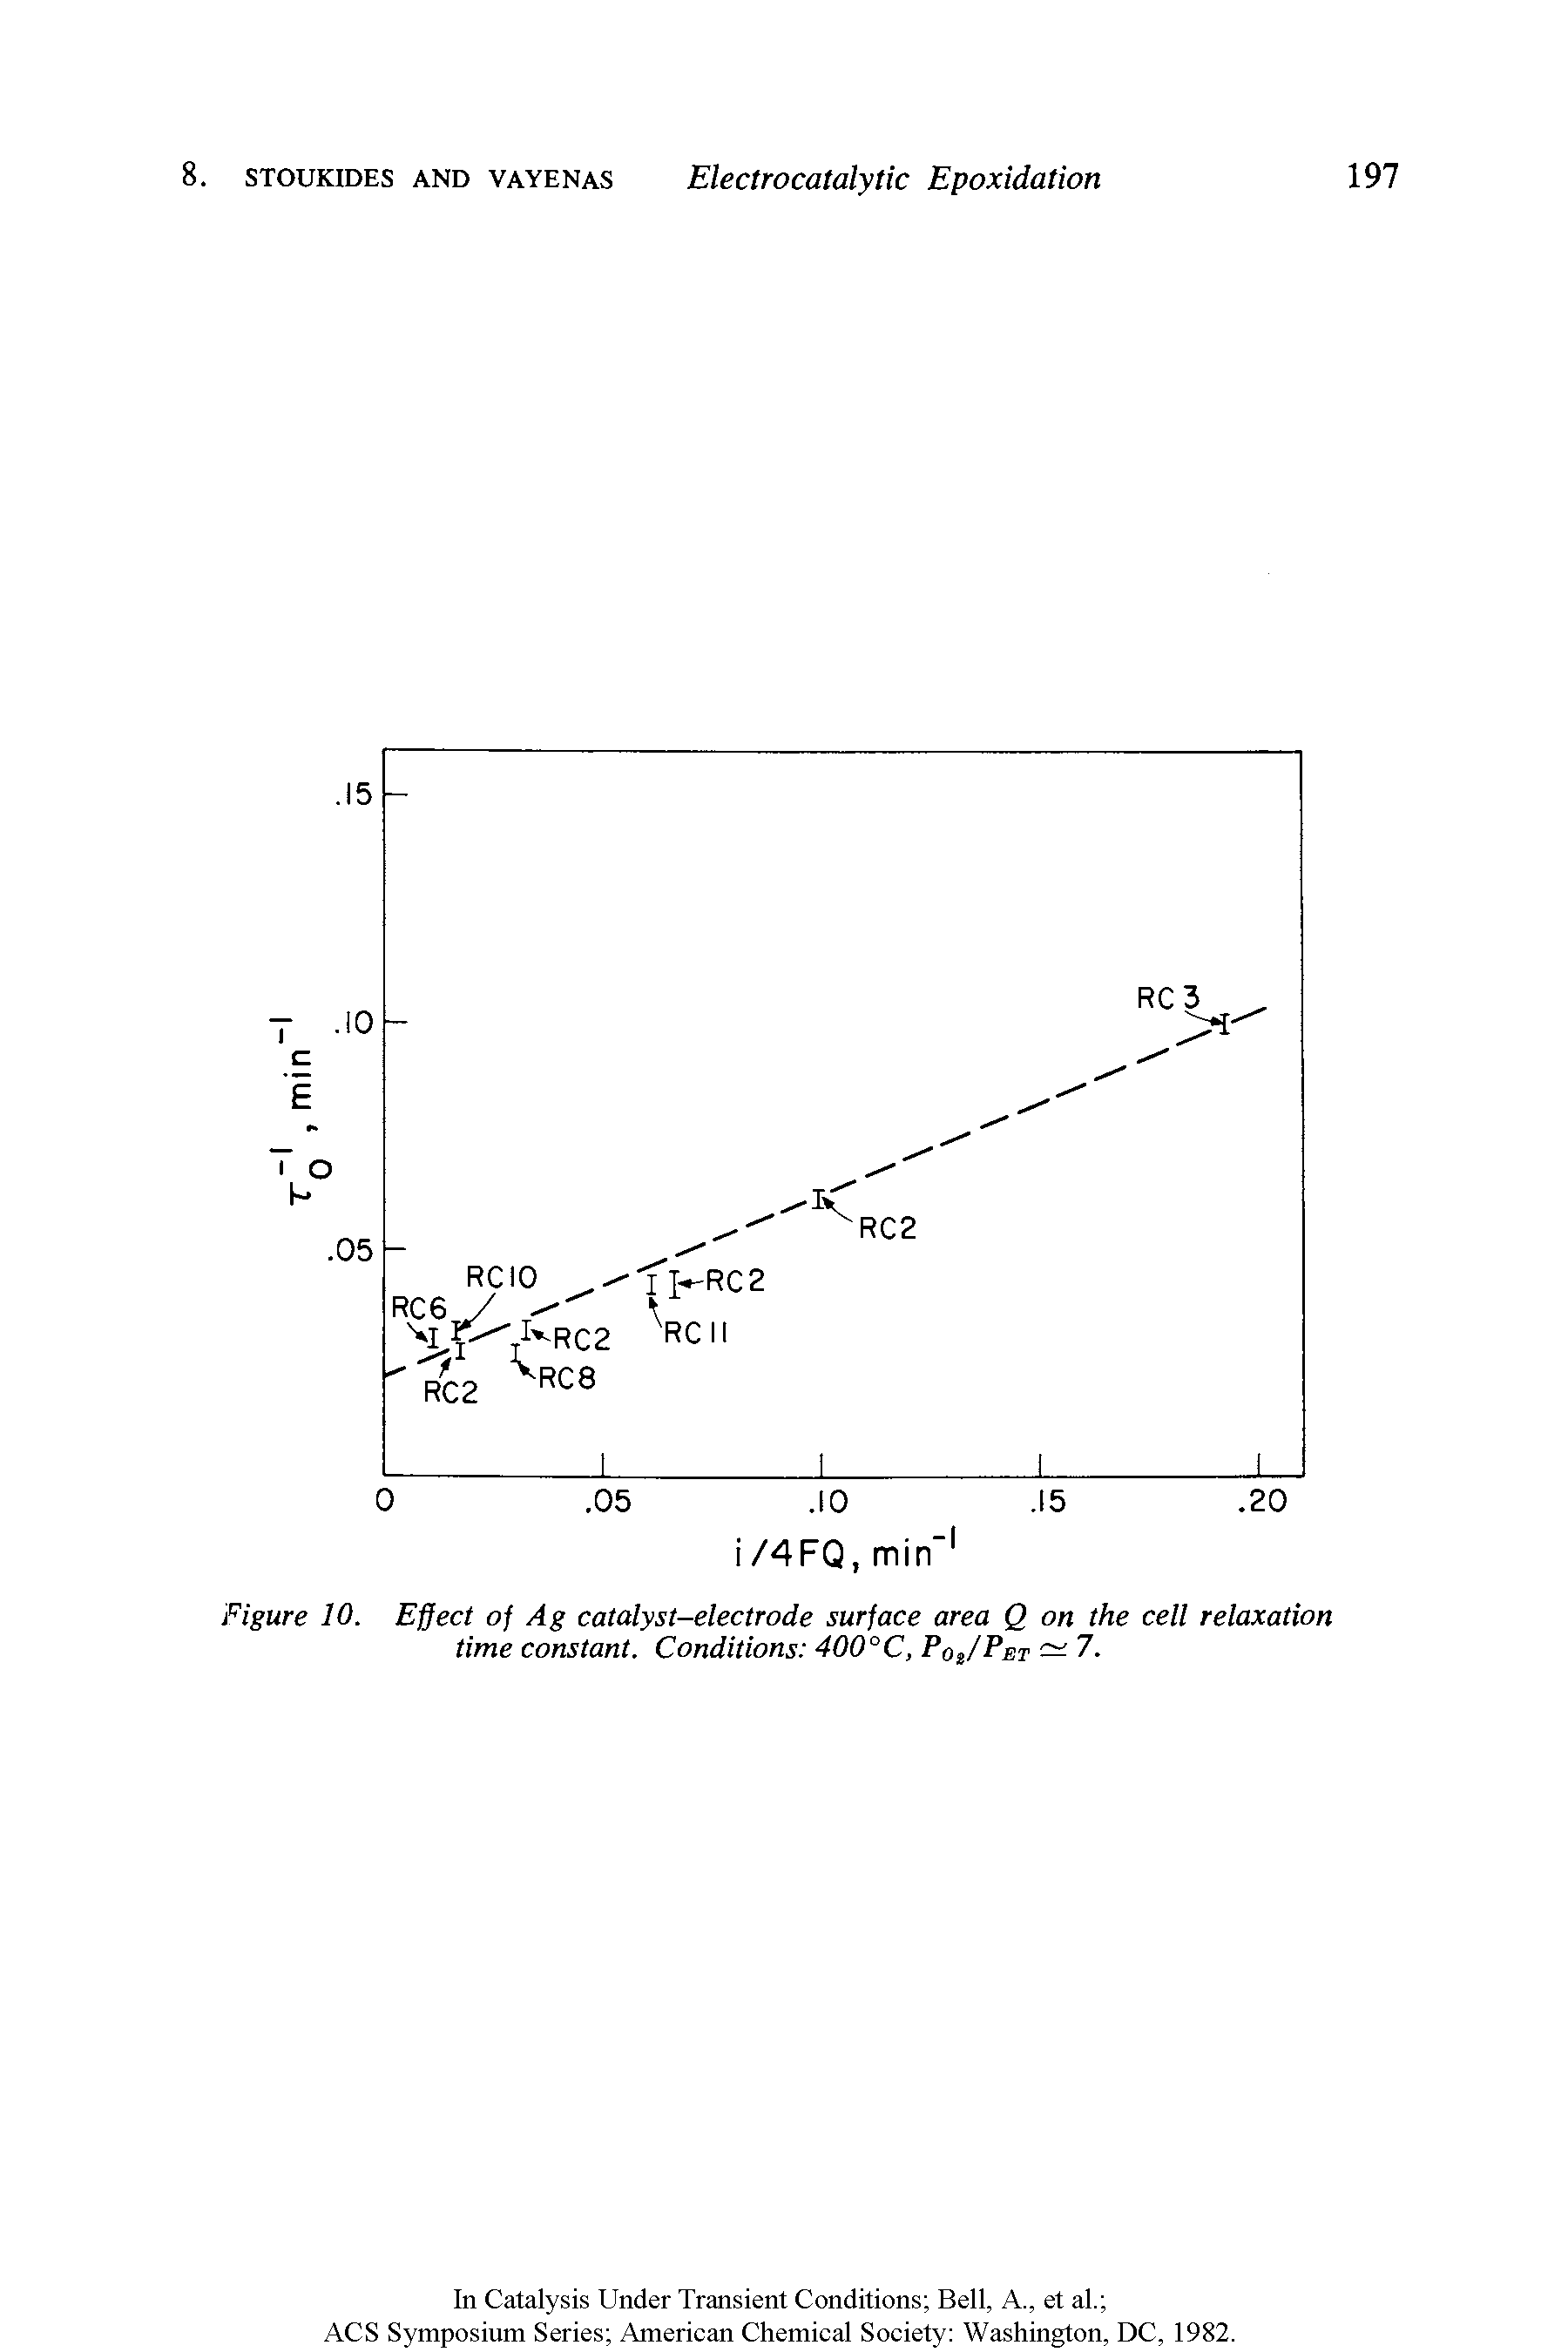 Figure 10. Effect of Ag catalyst-electrode surface area Q on the cell relaxation time constant. Conditions 400°C, PqJPet — 7.